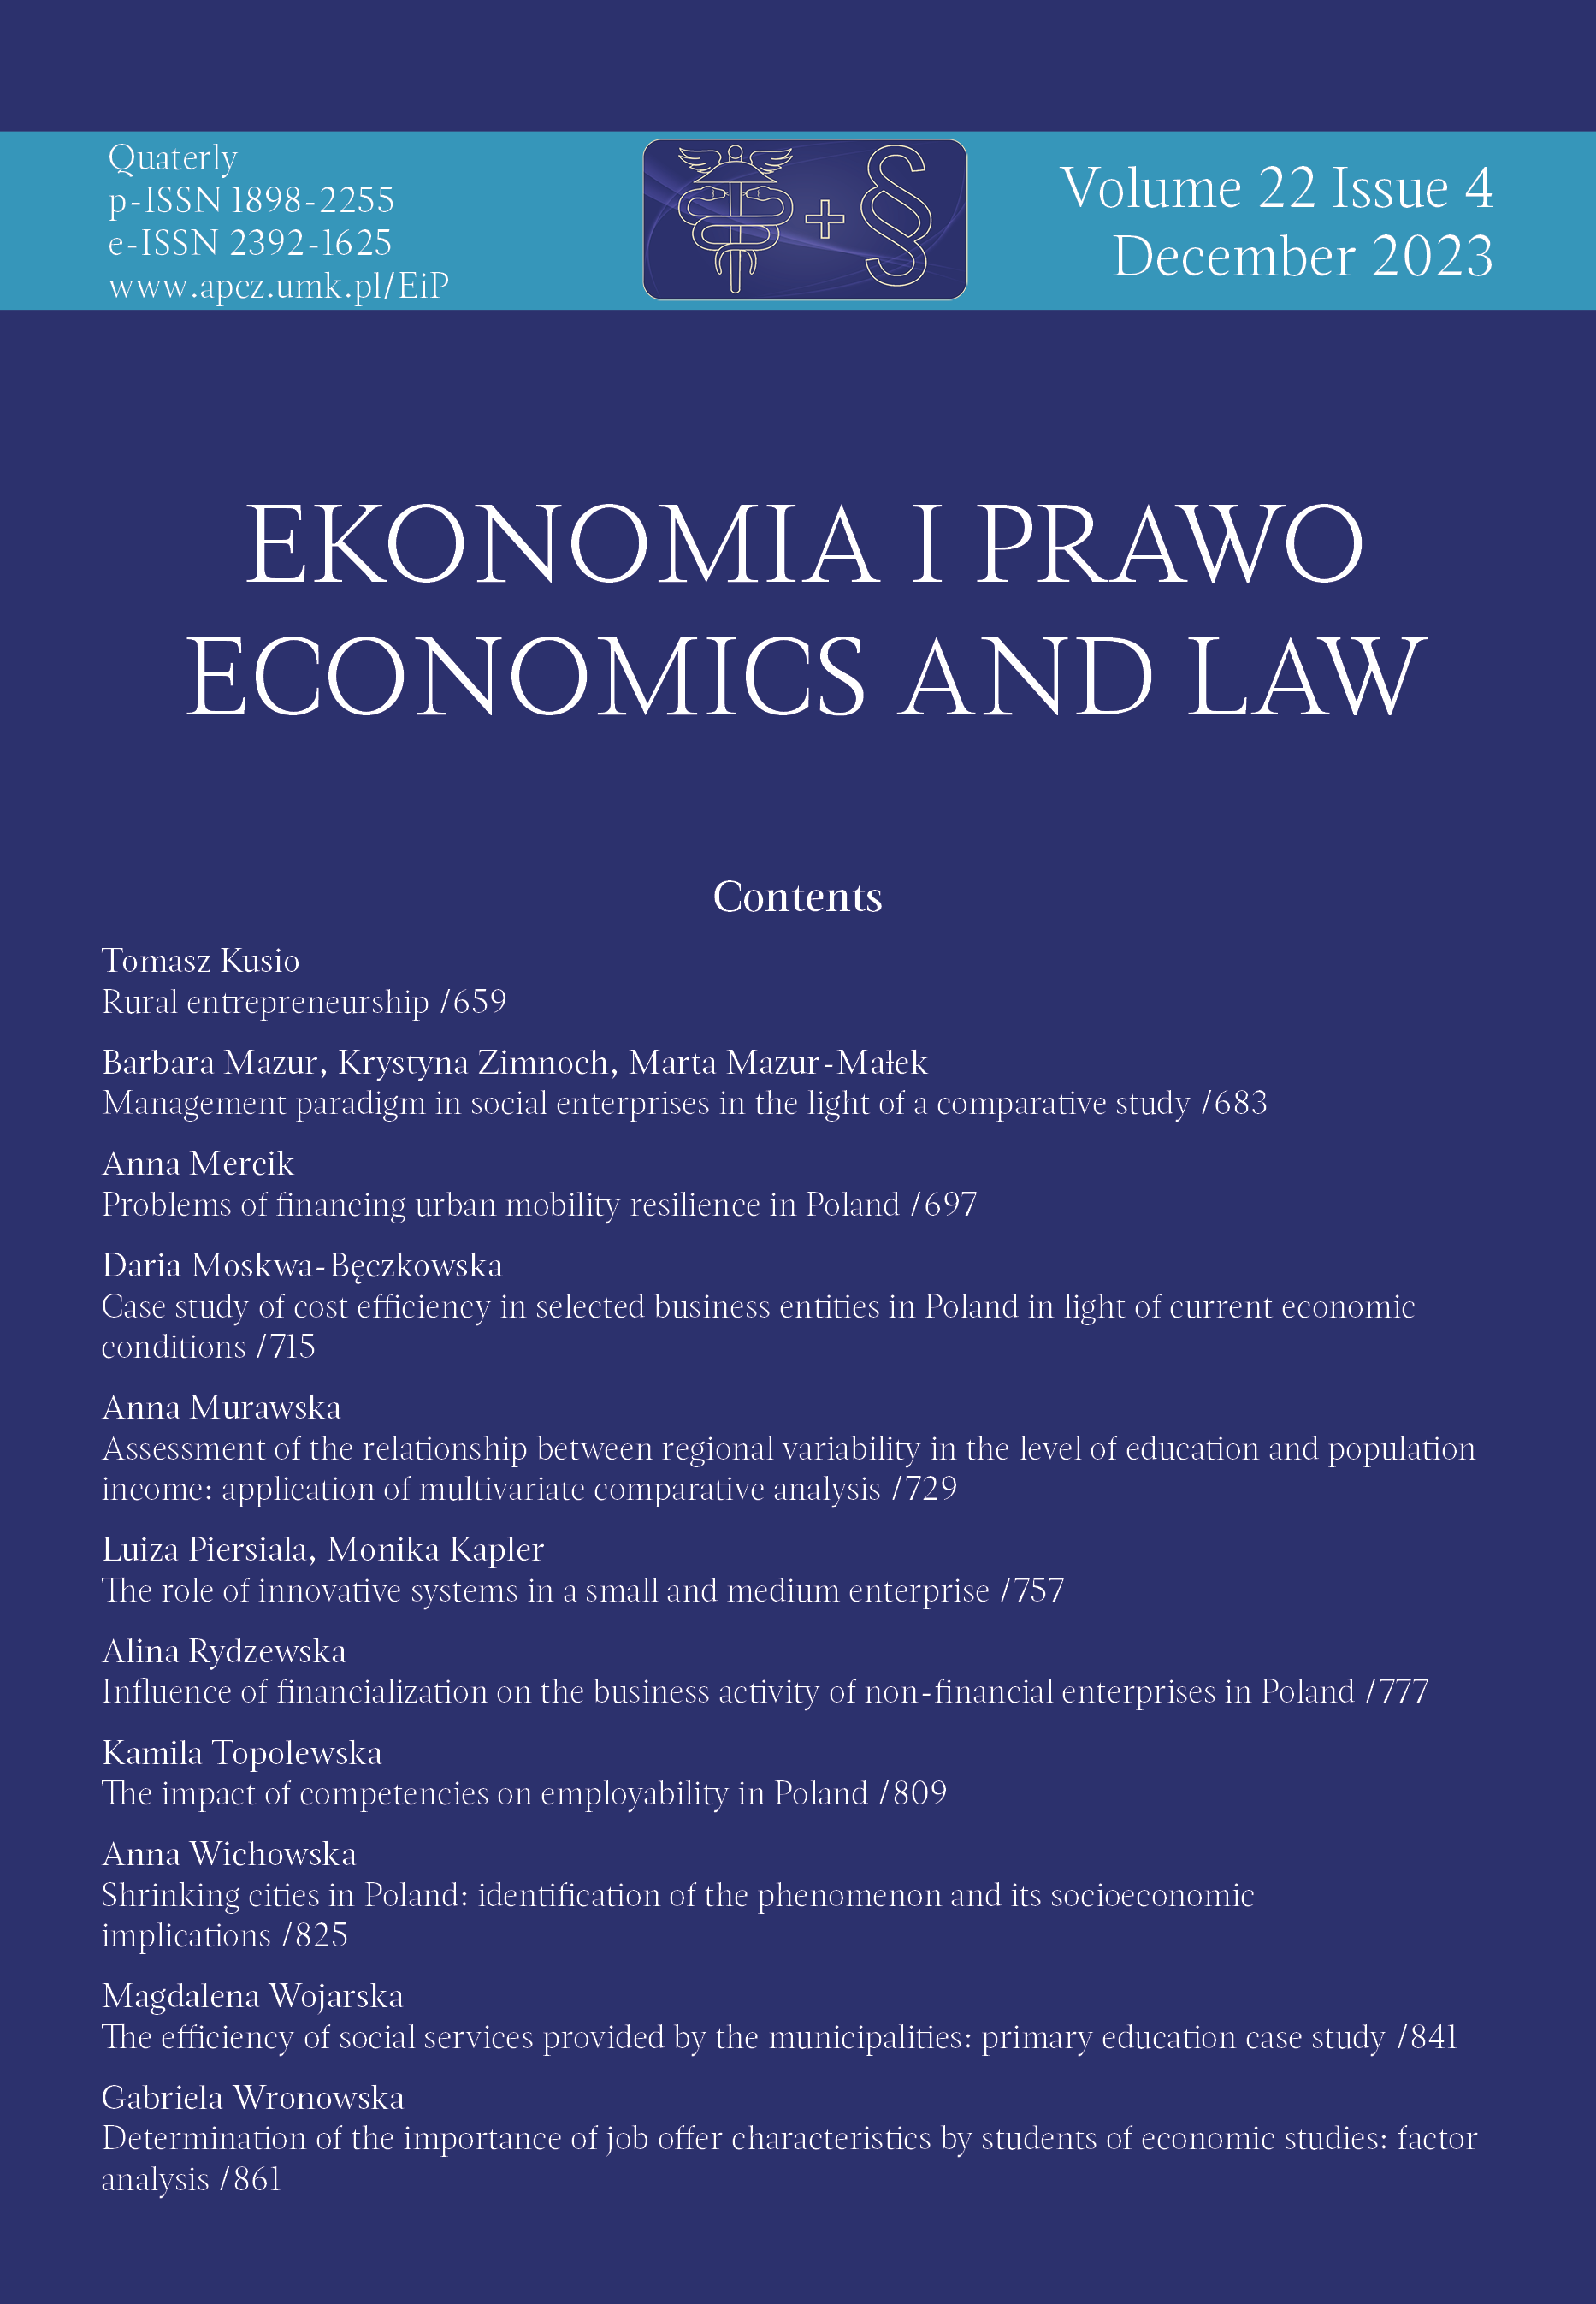 Case study of cost efficiency in selected
business entities in Poland in light
of current economic conditions Cover Image